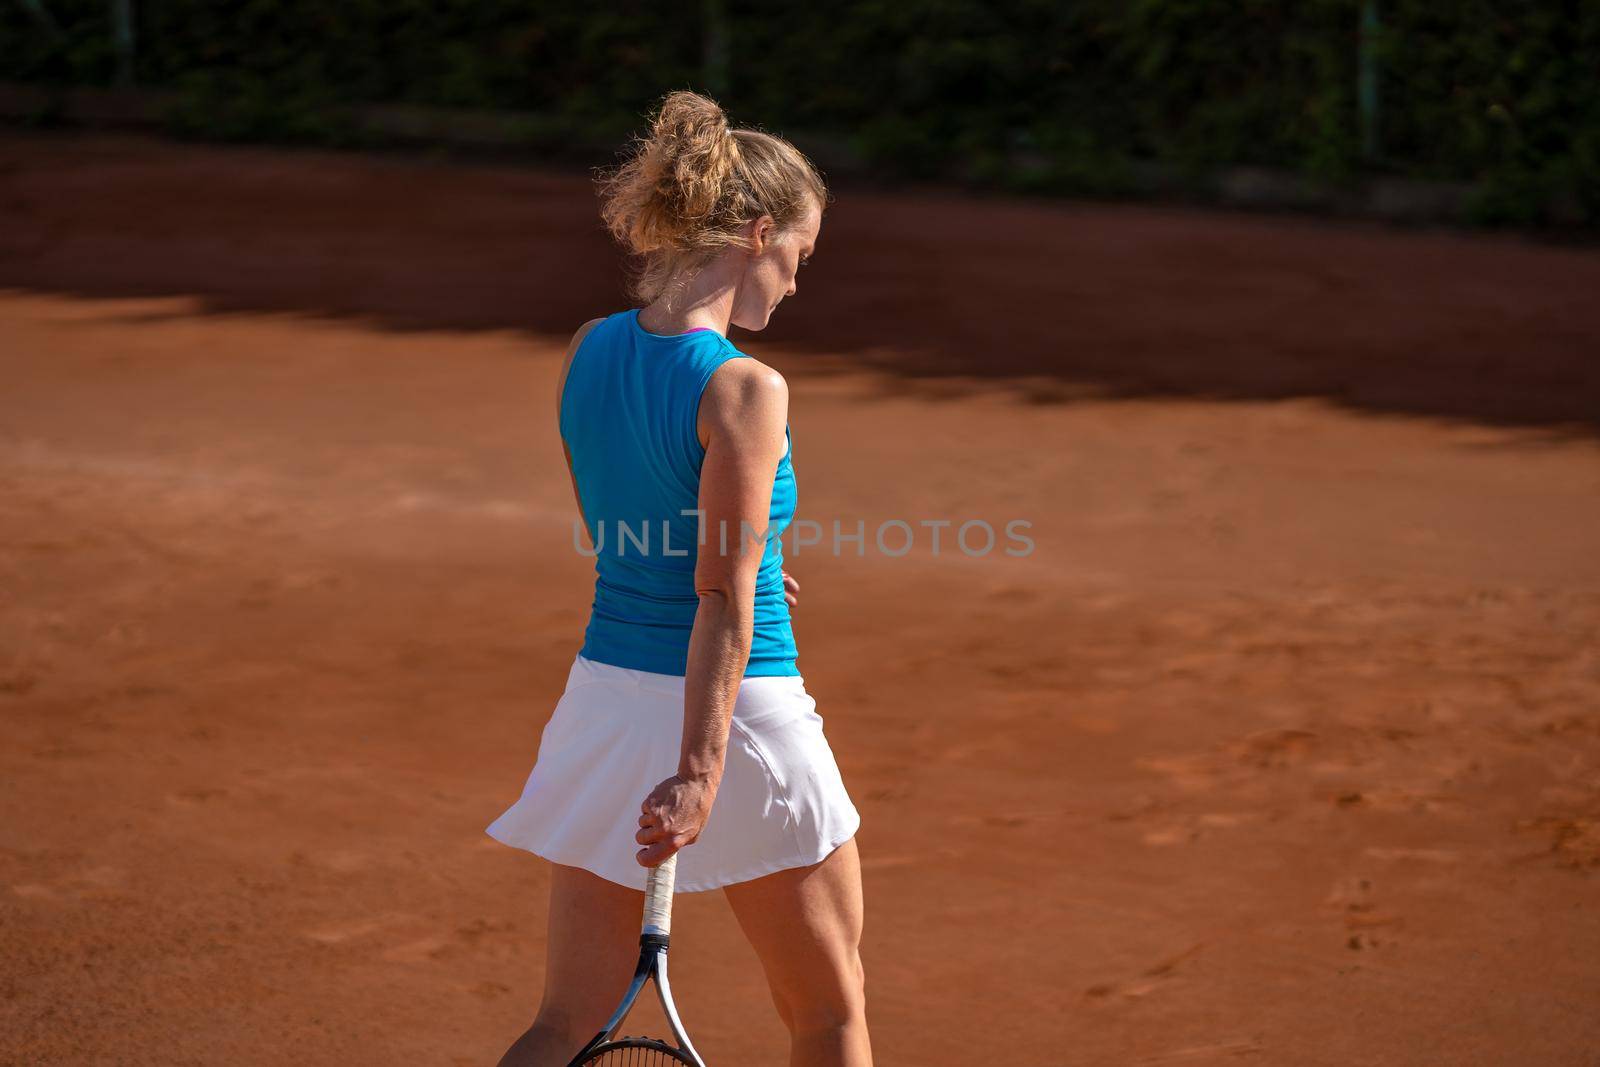 female tennis player on an outdoor clay court.